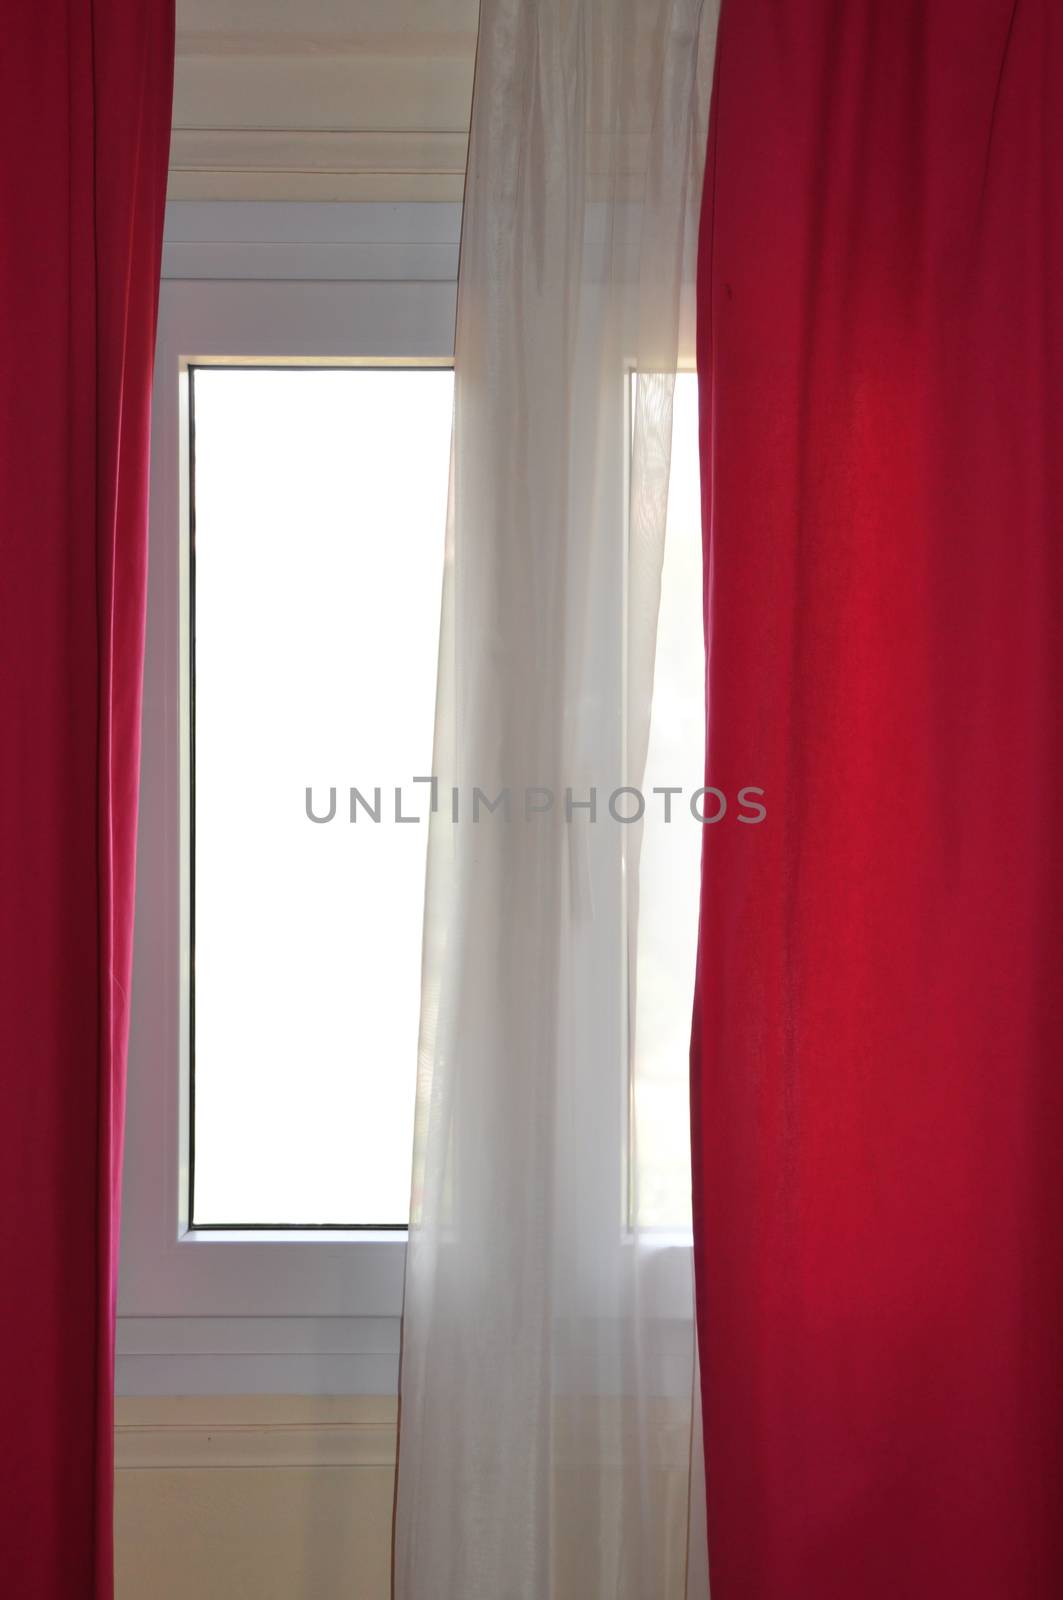 White and red window curtains abstract interior.